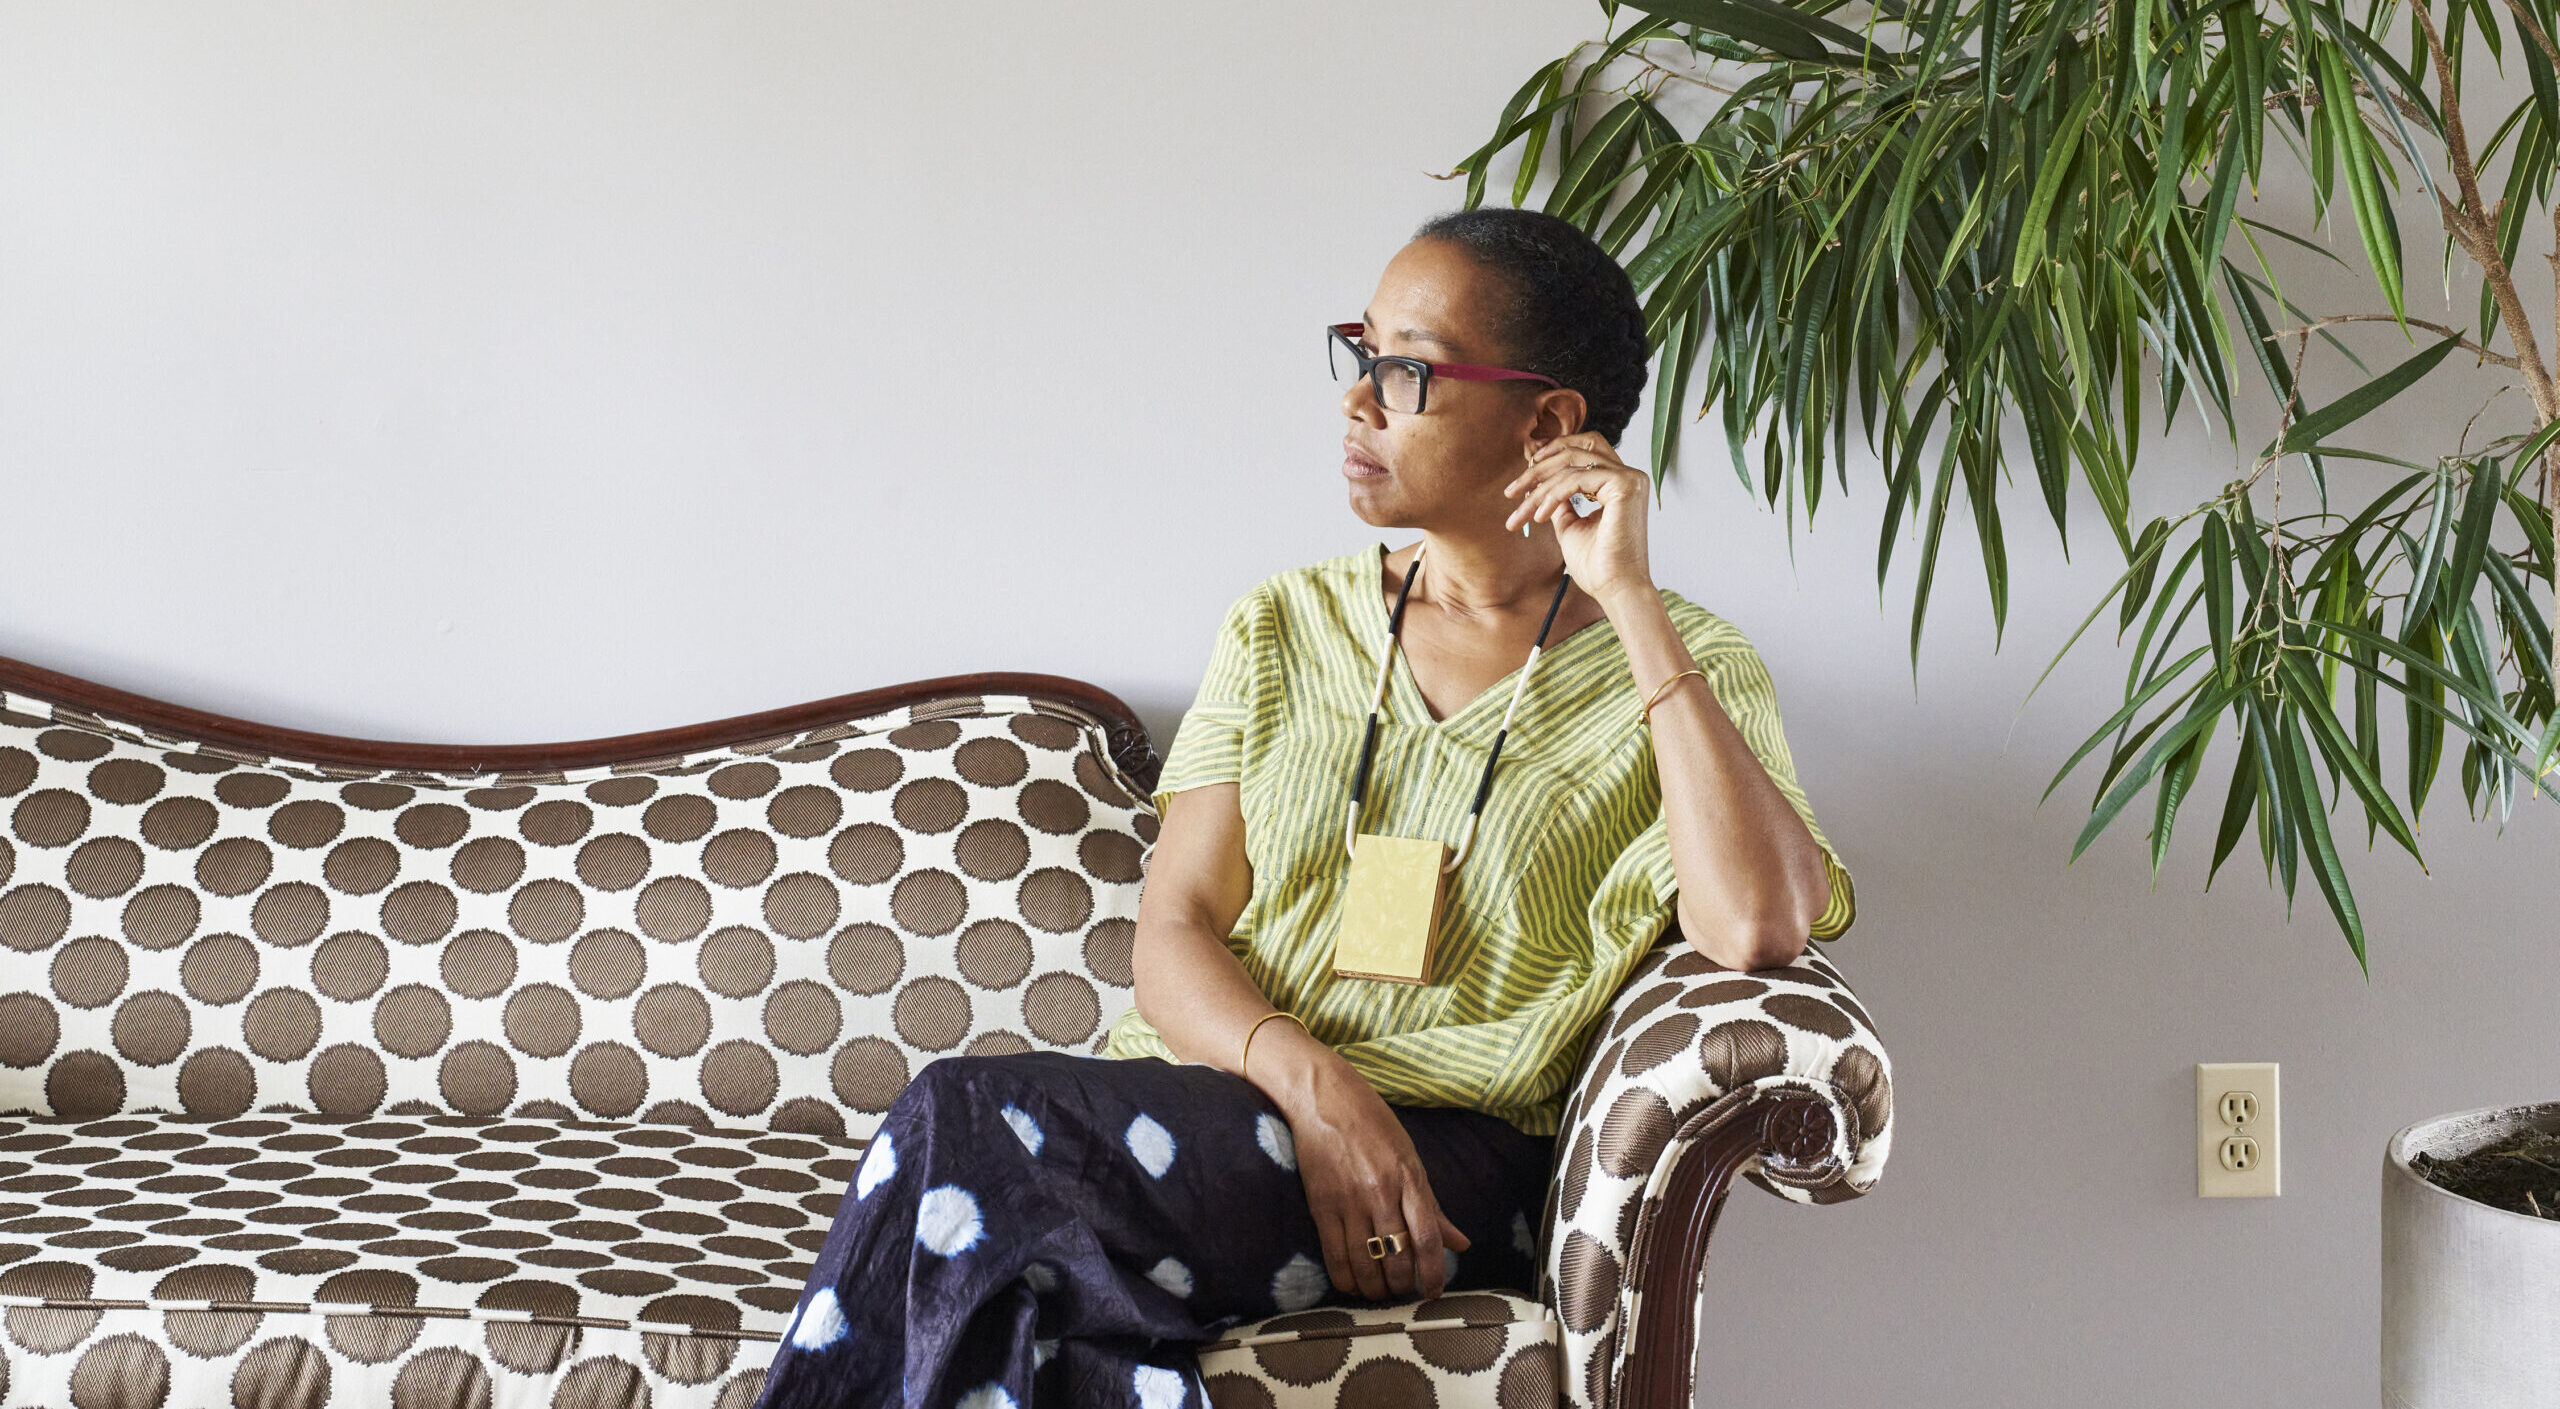 Sonya Clark calmly sits on a polka-dot couch against a white wall, next to a large plant. She is a medium-skinned adult woman with dark hair pulled back, looking to her right with her legs crossed. She wears a striped top, black pants with large white dots, glasses, and a necklace.